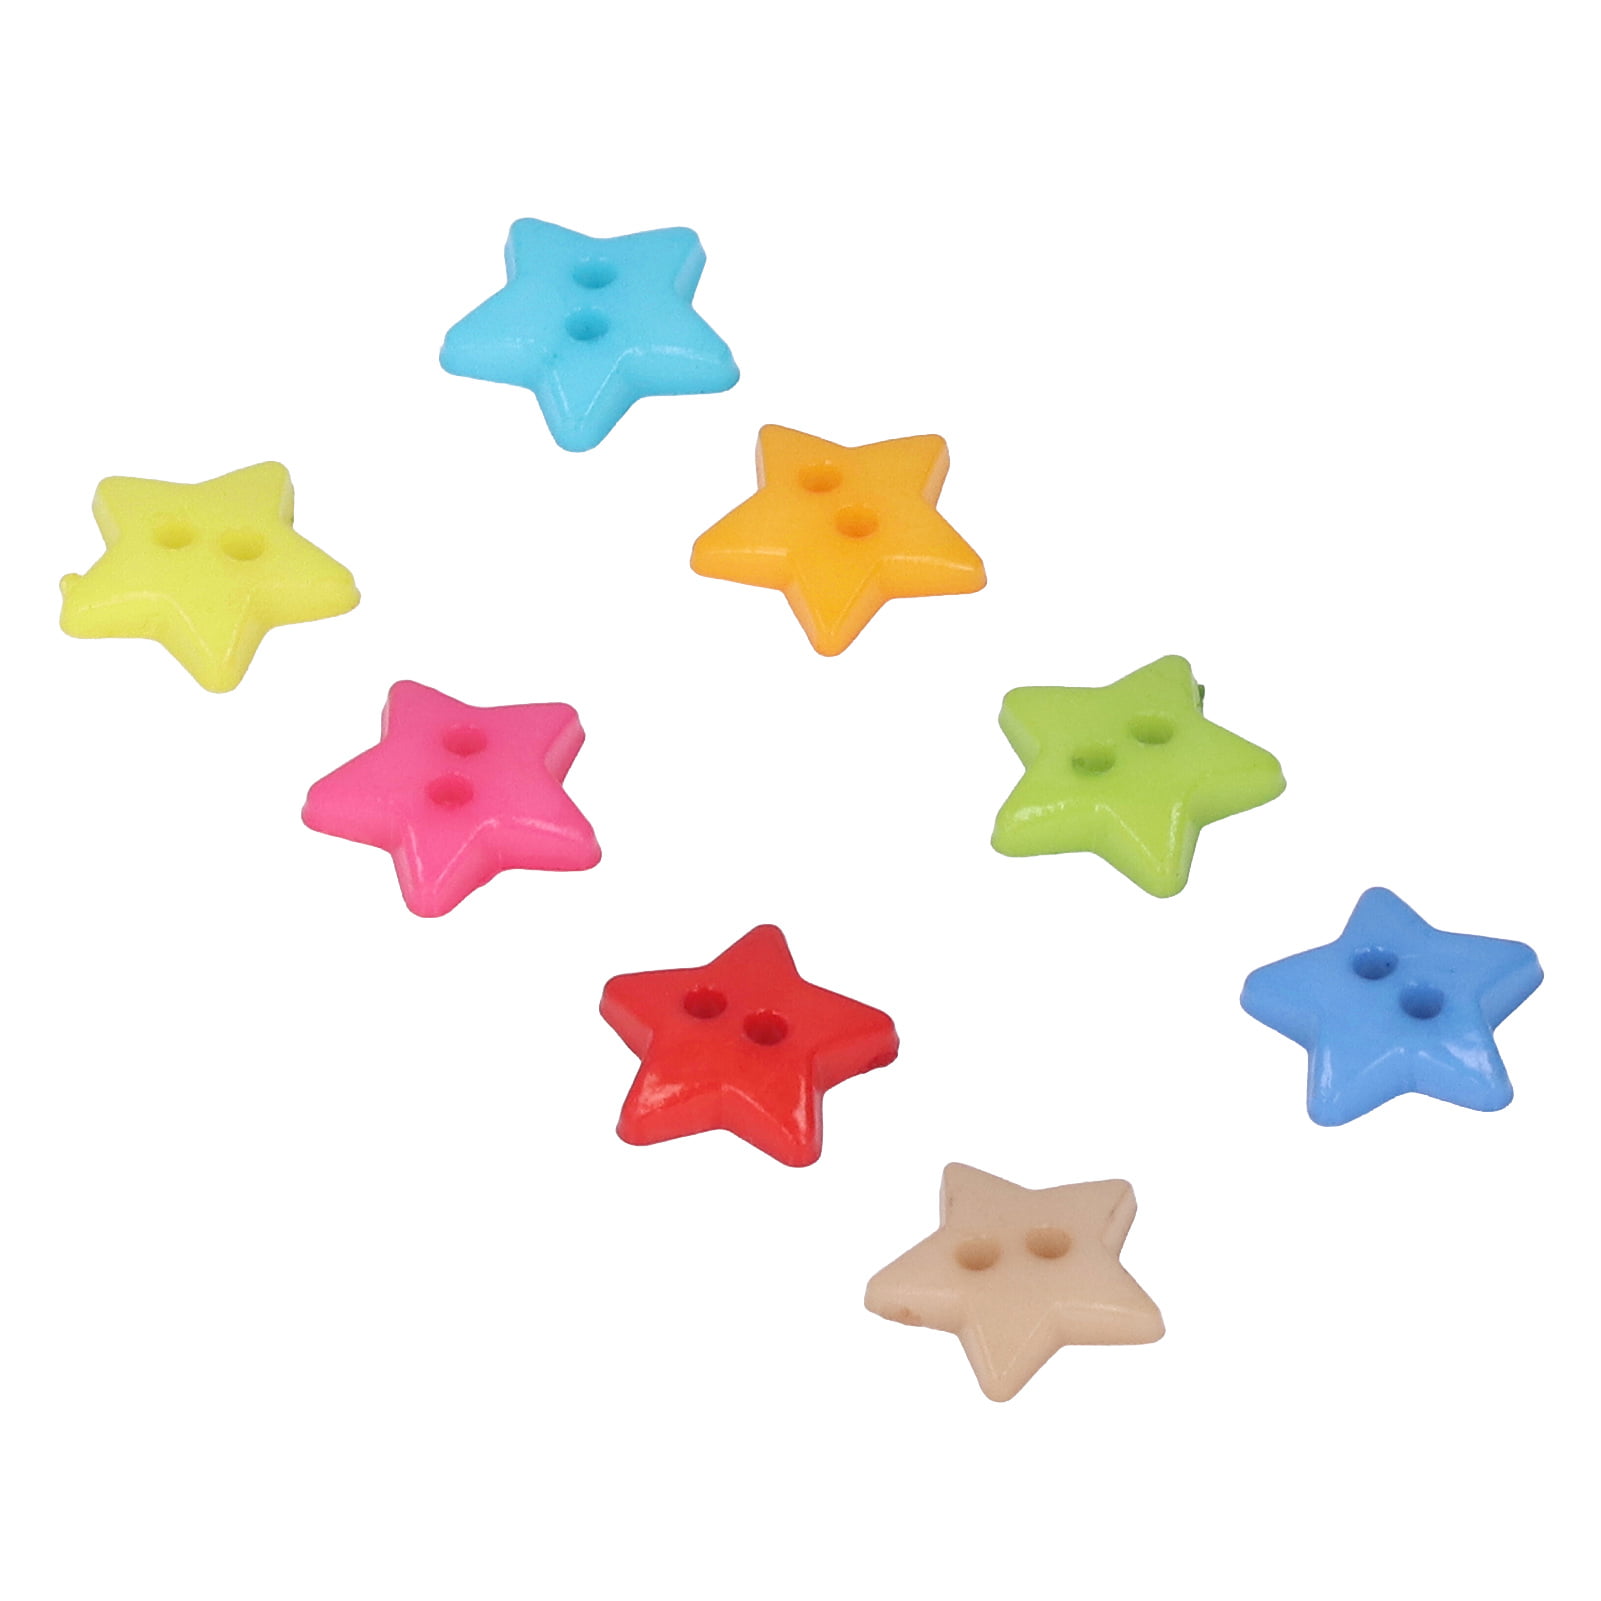 Spptty 200Pcs Star Buttons Colorful Unique Design Cute Small Decorative  Buttons For Sewing Decoration DIY Crafts,Buttons For Sewing,Craft Buttons